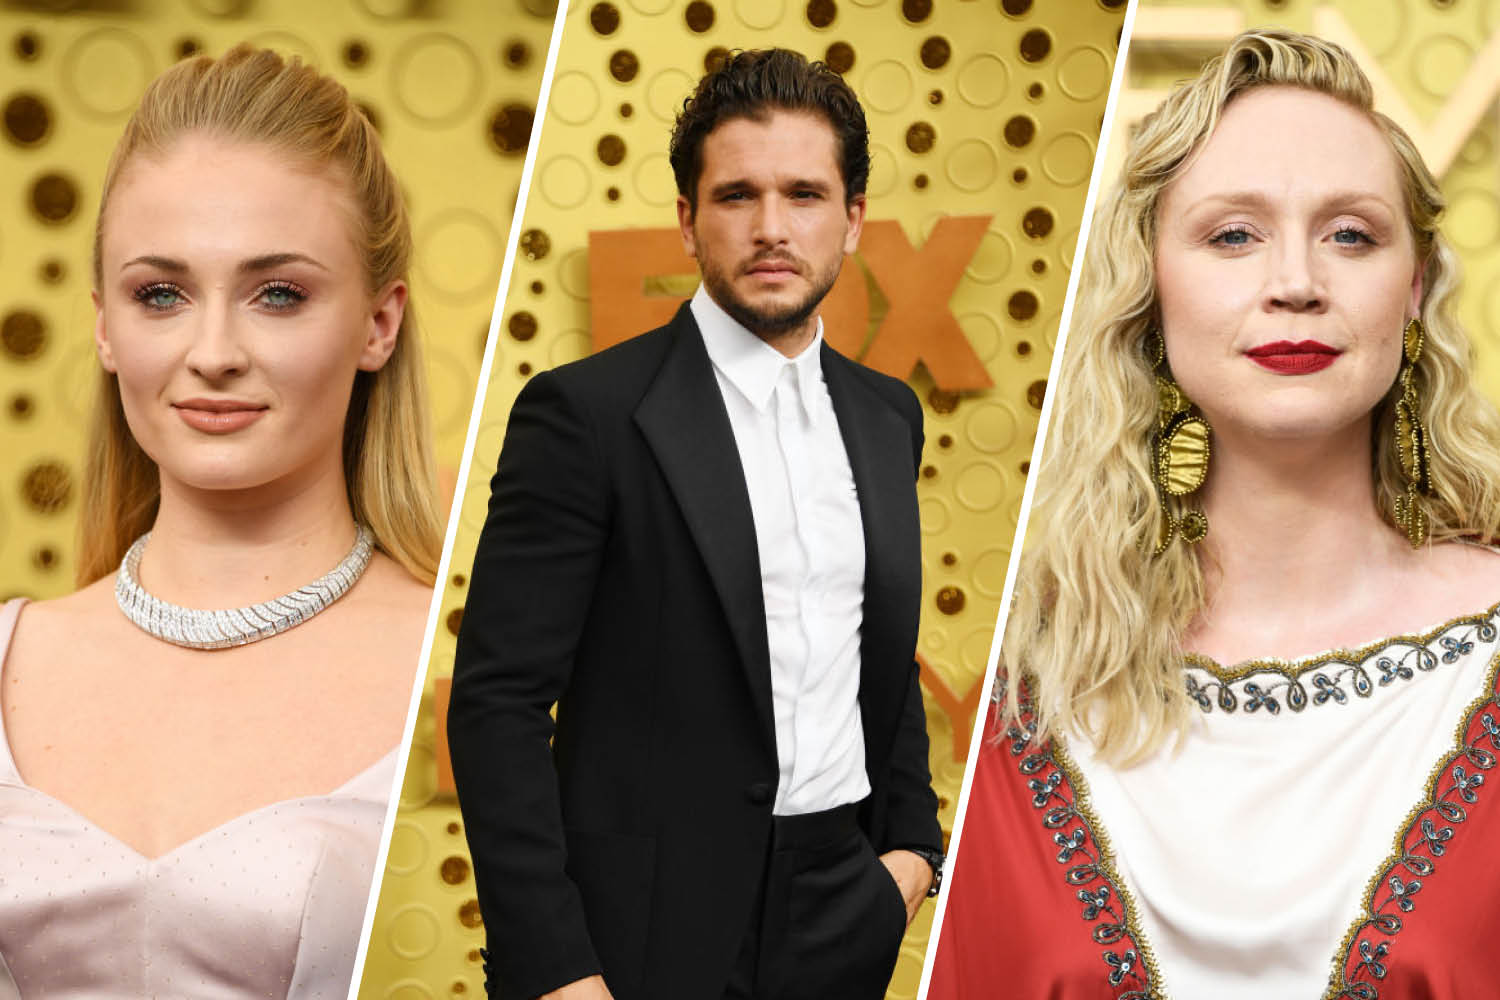 The ‘Game of Thrones’ Cast Look Ready To Claim The Iron Throne At The 2019 Emmys